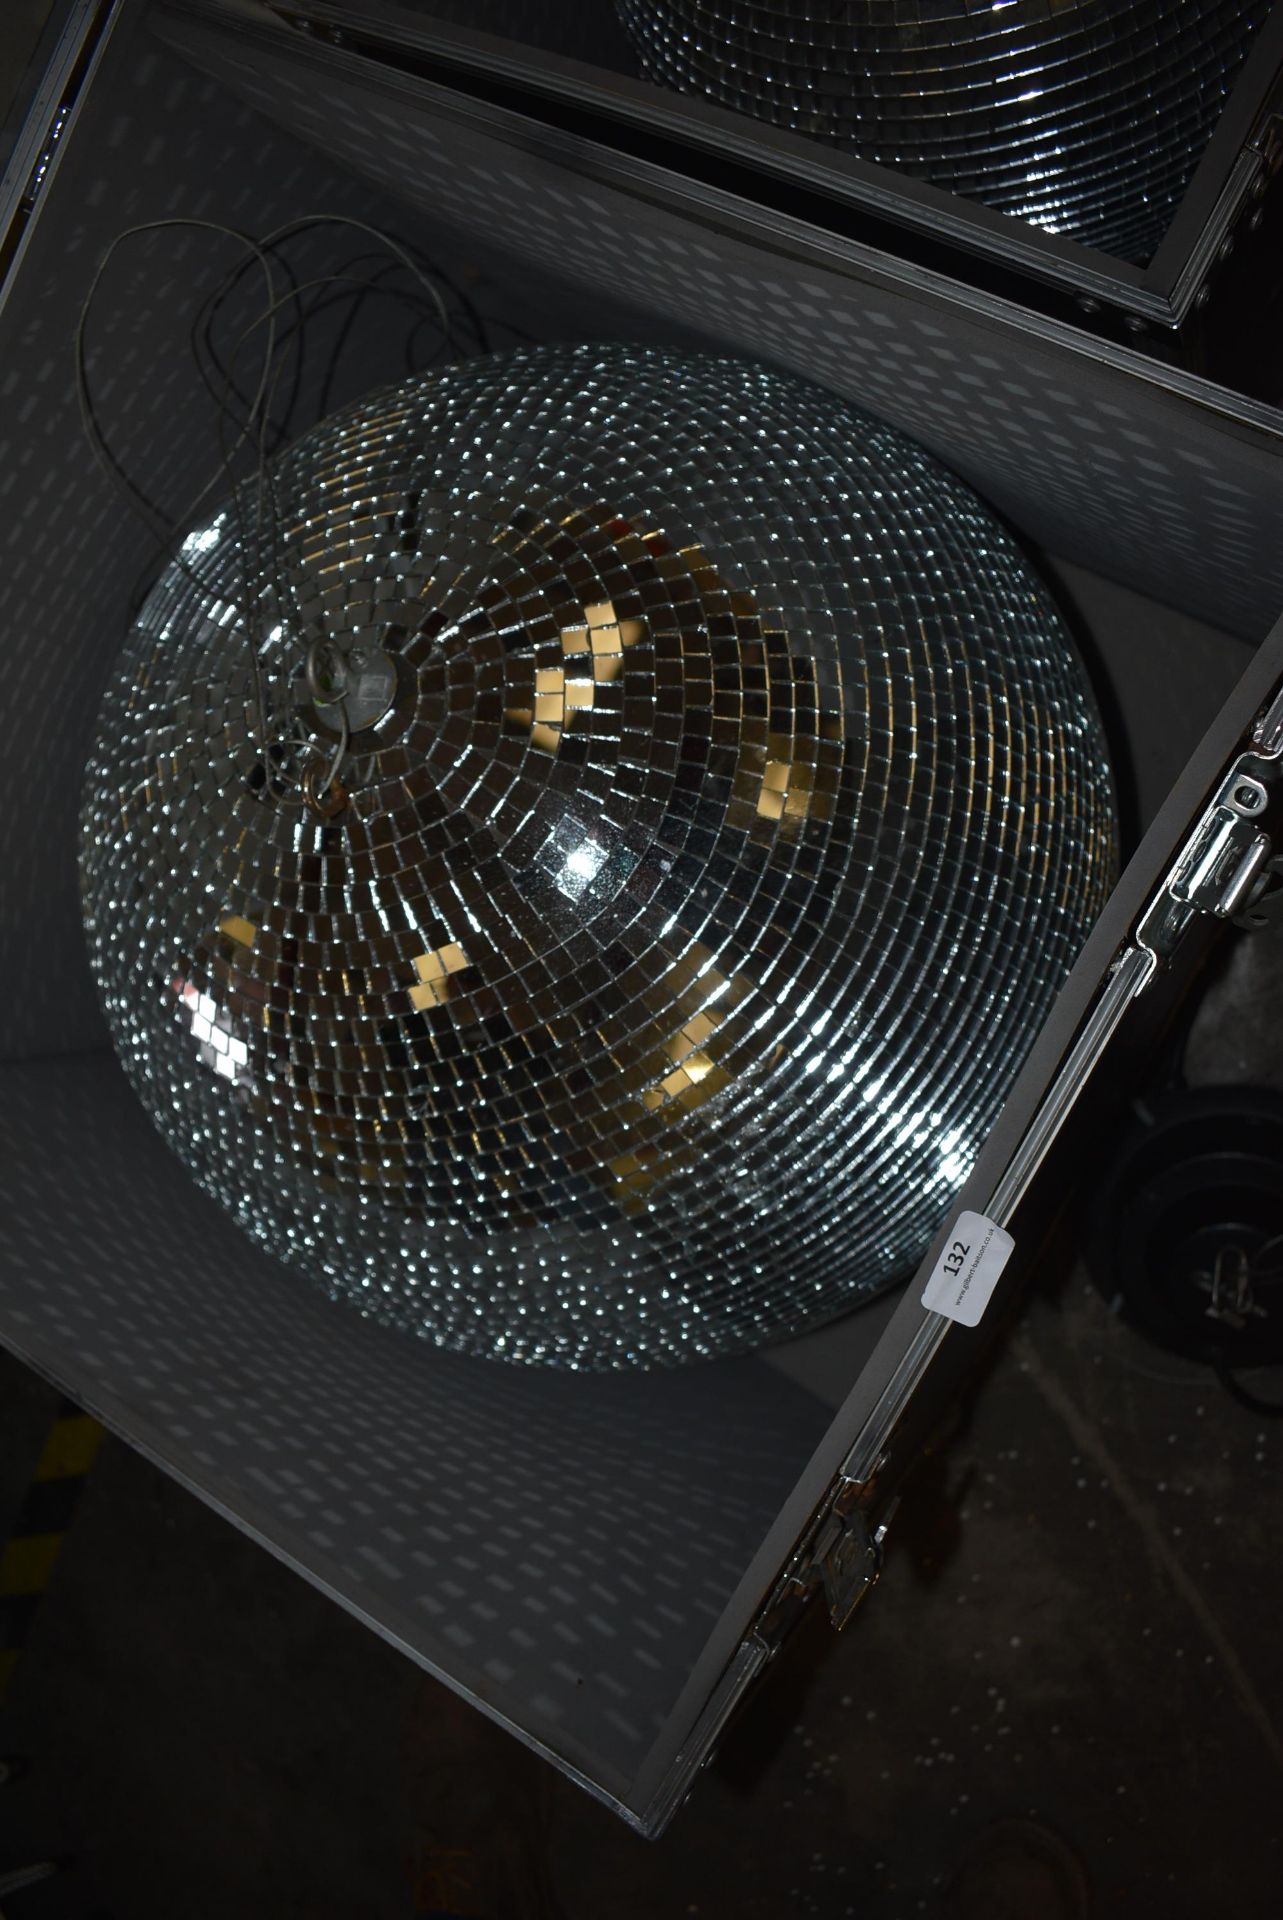 *Large Mirrored Ball with Flight Case, Pinspots and Motor